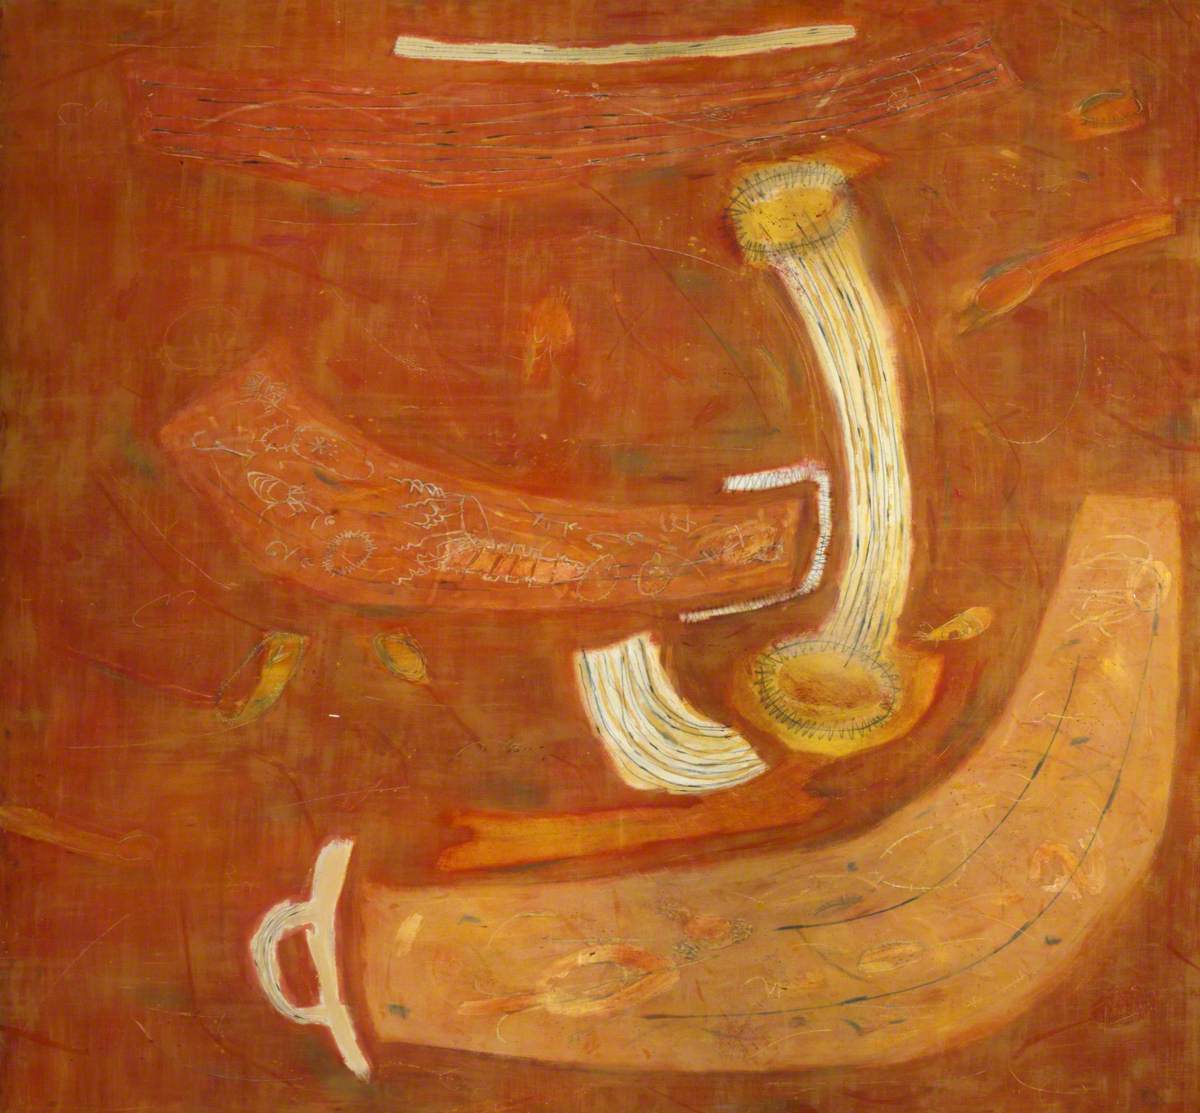 Composition in Orange with Organic Forms